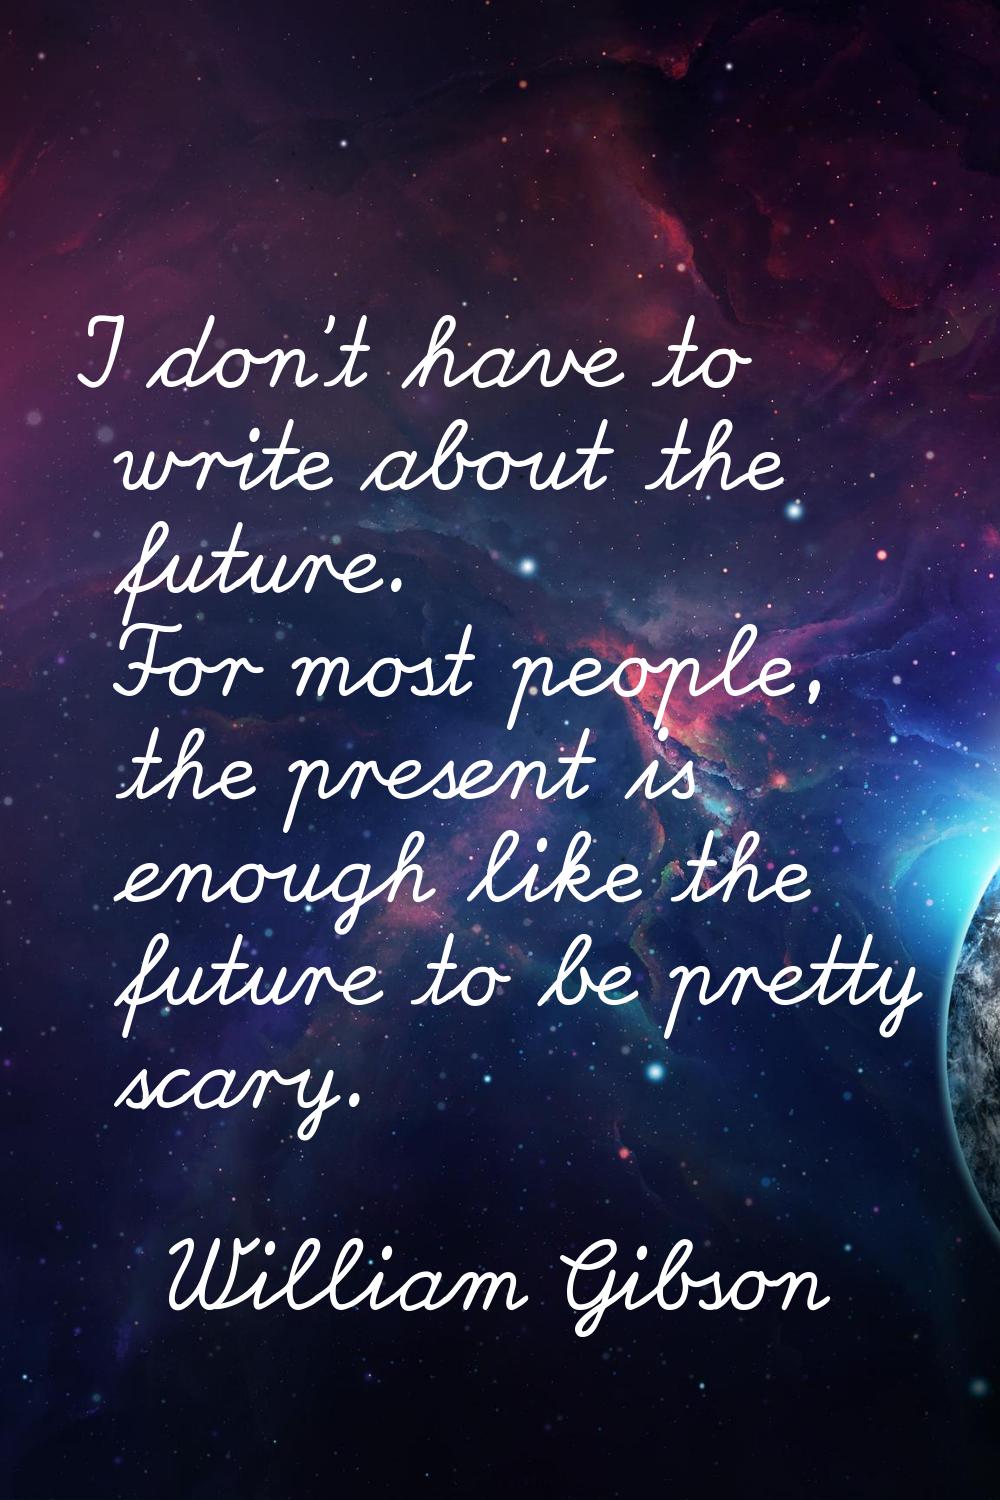 I don't have to write about the future. For most people, the present is enough like the future to b